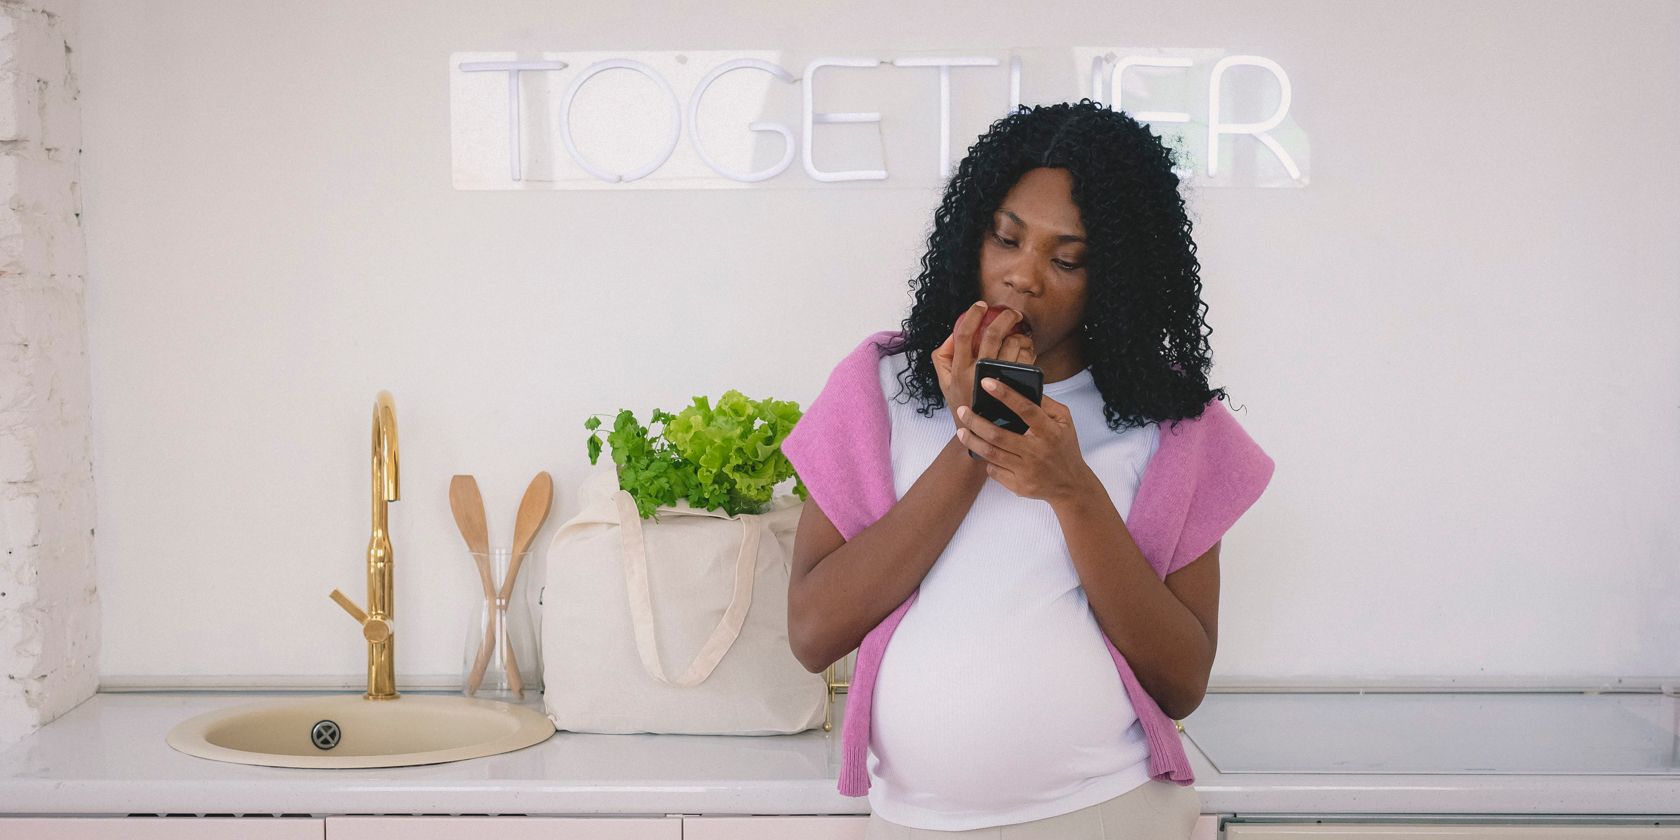 A pregnant woman uses her smartphone in a kitchen while eating an apple